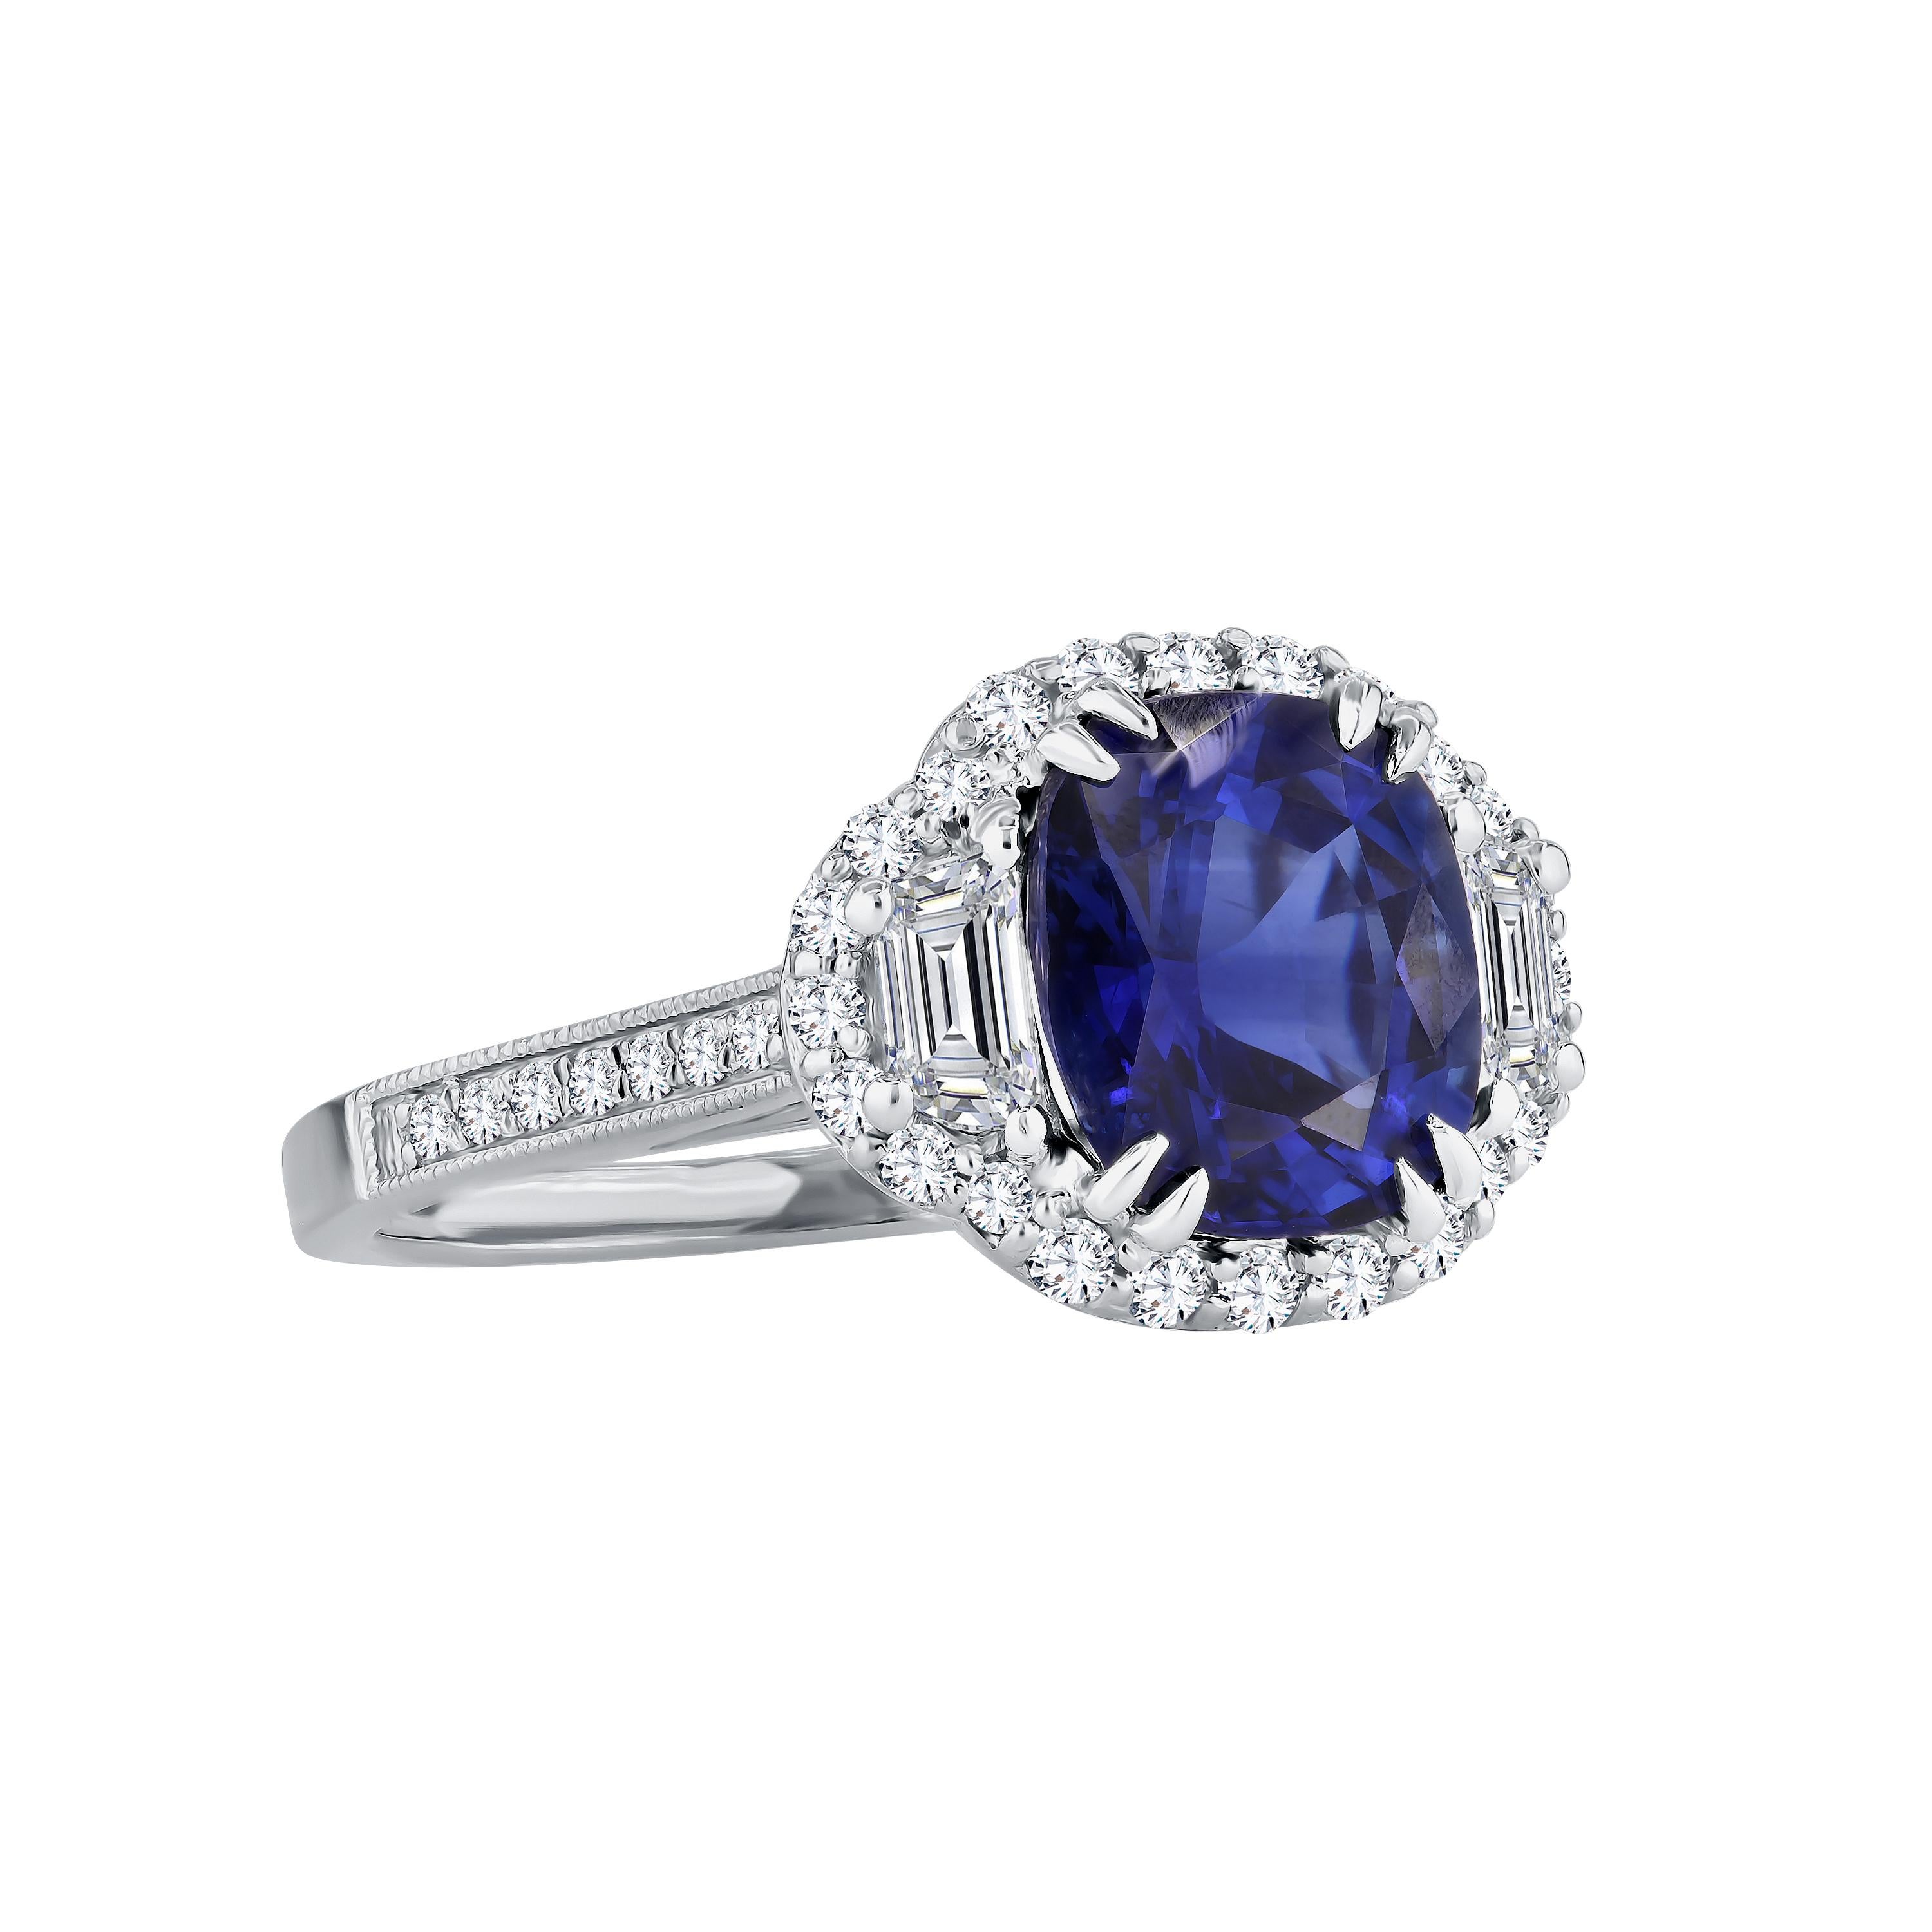 Behold this magnificent ring, graced by the presence of a GIA Certified cushion-cut vivid blue sapphire at its heart, encircled by a radiant halo of round white diamonds. Certification details can be found in the accompanying photo, showcasing the